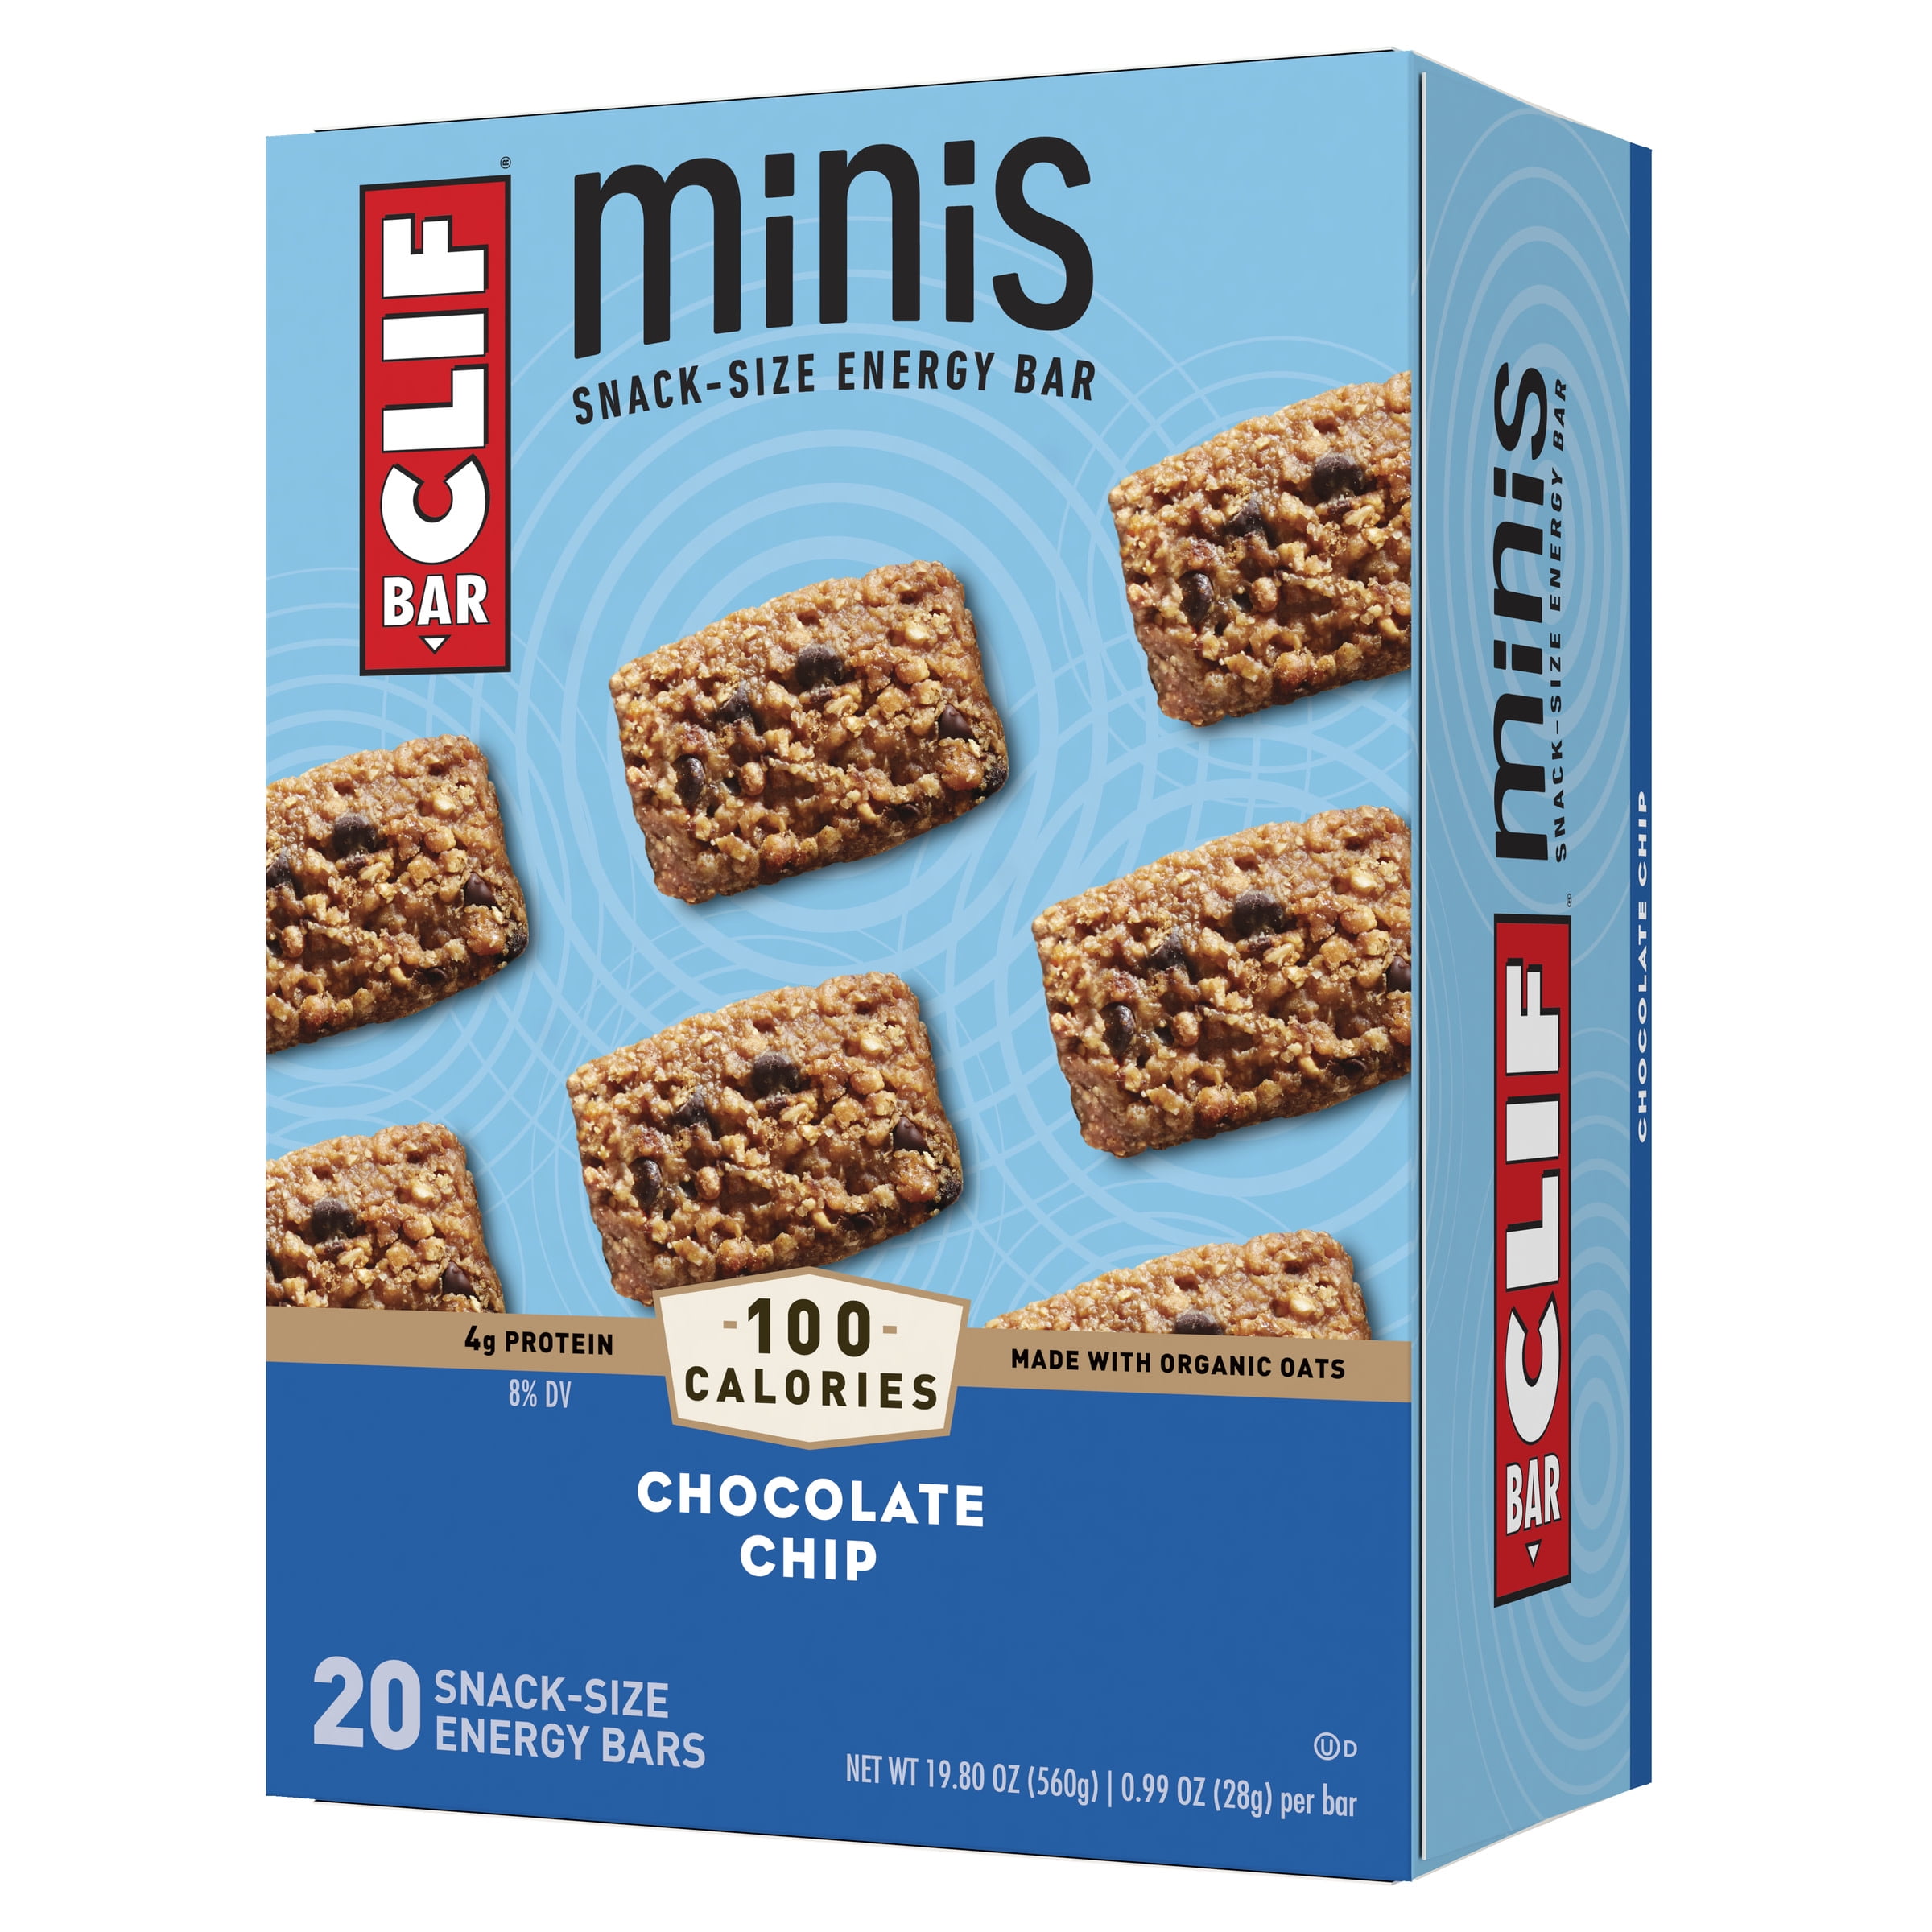 180 Snacks Skinny Rice Bar Variety Pack (Almonds Blueberries & Almond  Cranberries), Only 60 Calories per Bar, Total 40 Bars, Net wt 20 oz (560g)  